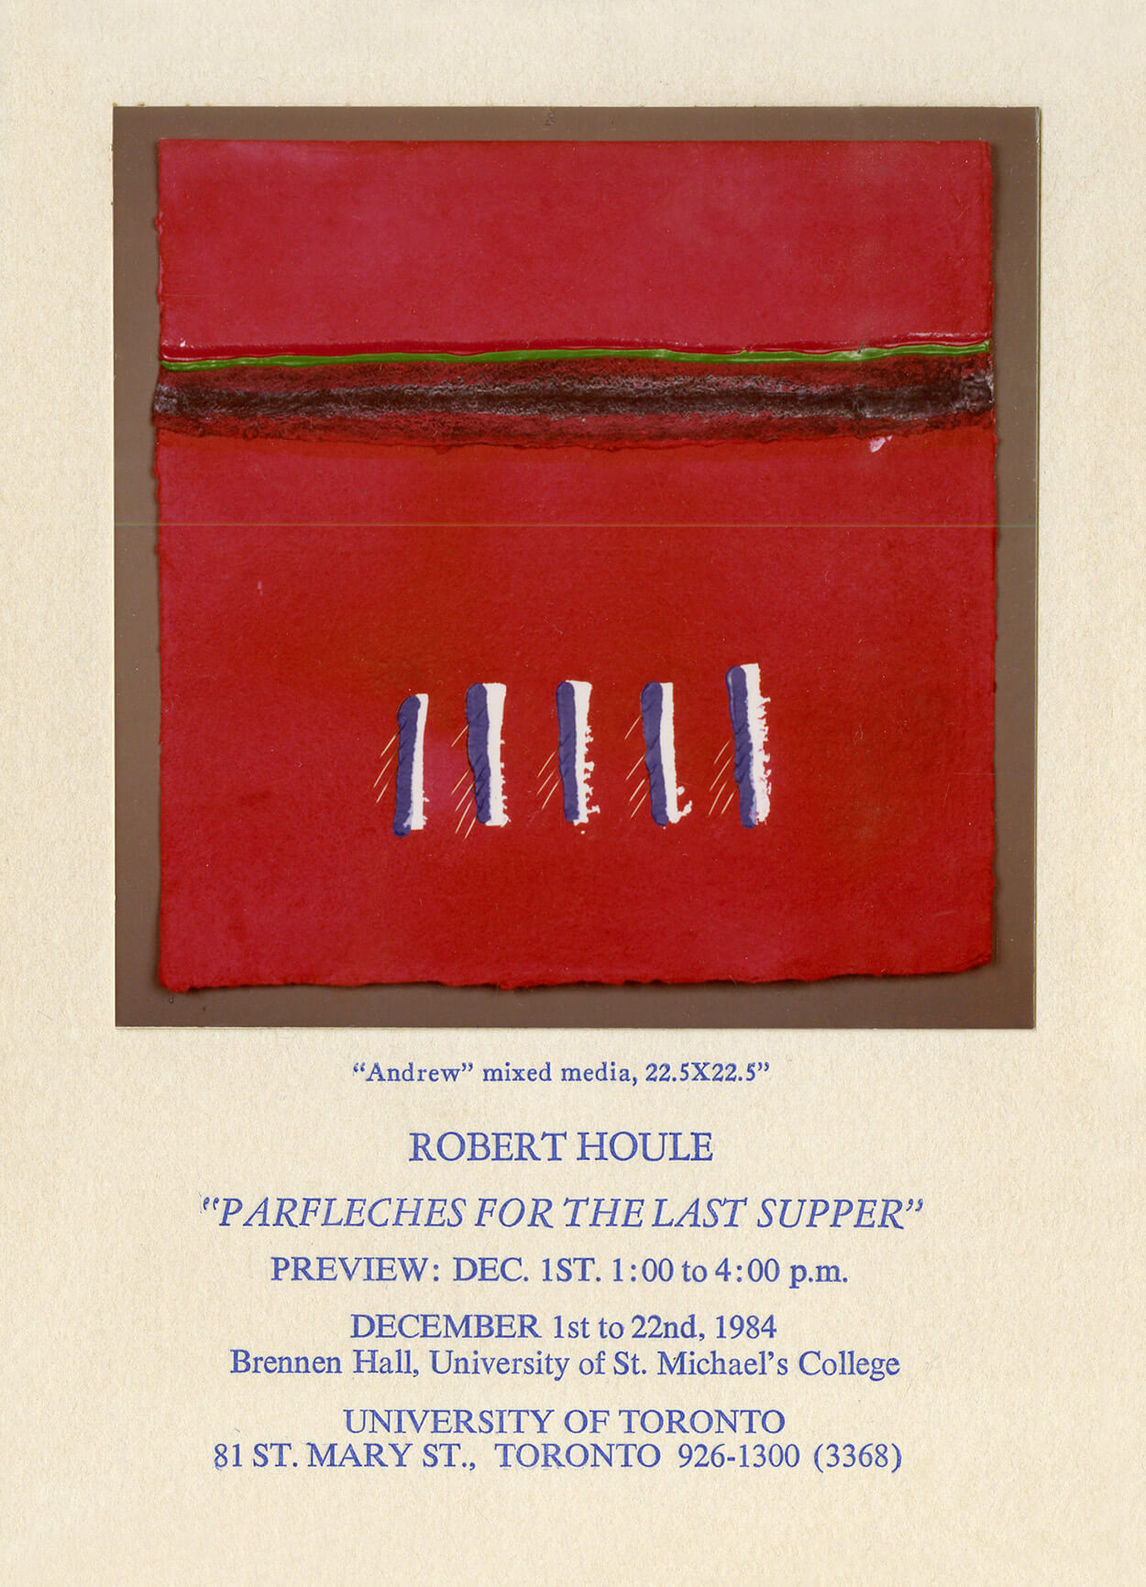 Invitation to the opening of Robert Houle’s first solo exhibition, Parfleches for the Last Supper, 1984